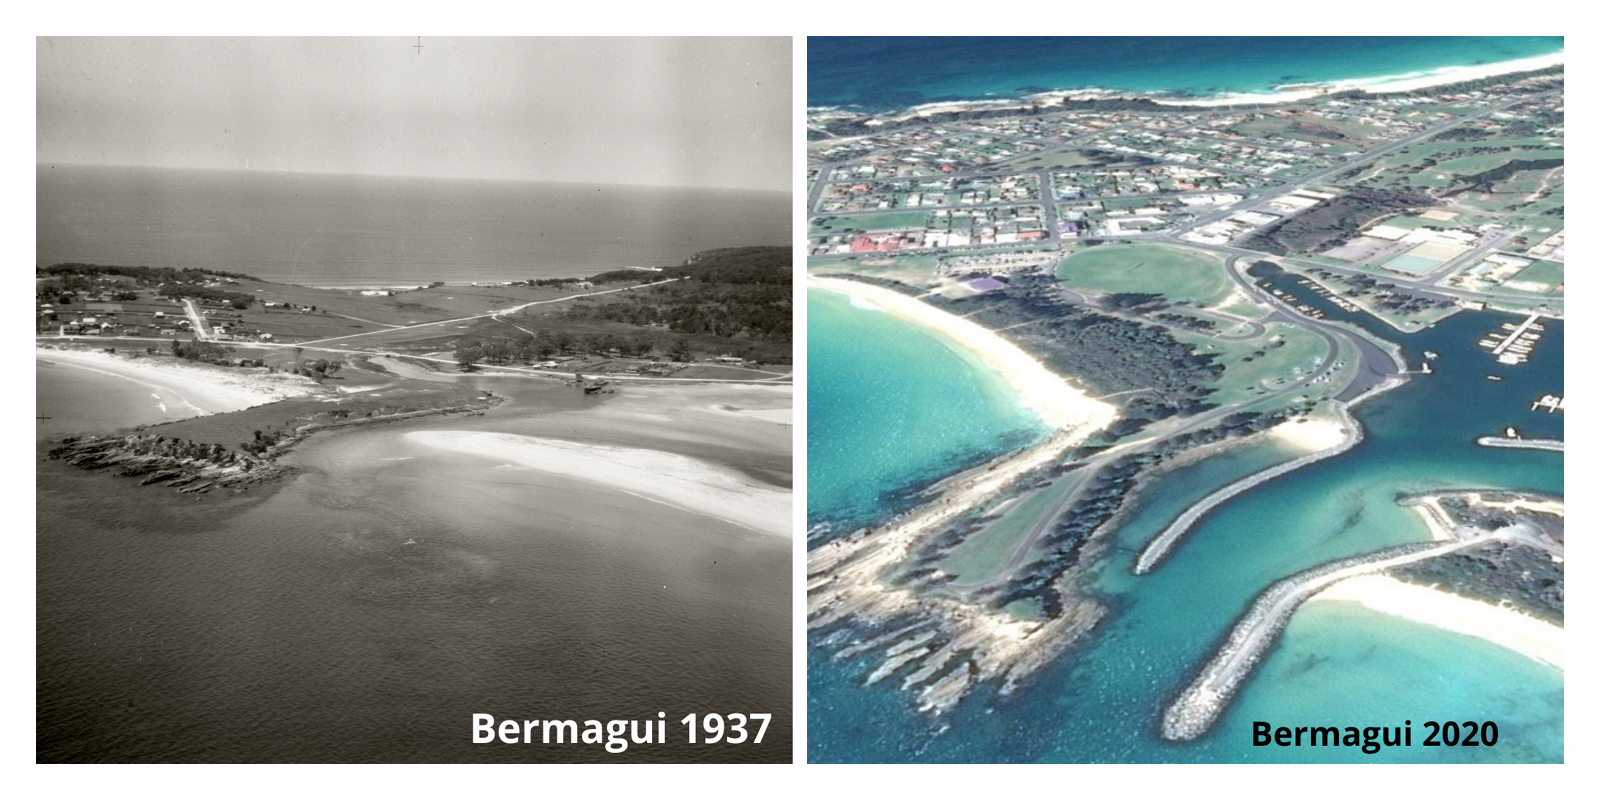 Each image shows an historical image compared with what the river mouth looks like today. There is significant difference in the river entrance when compared. 